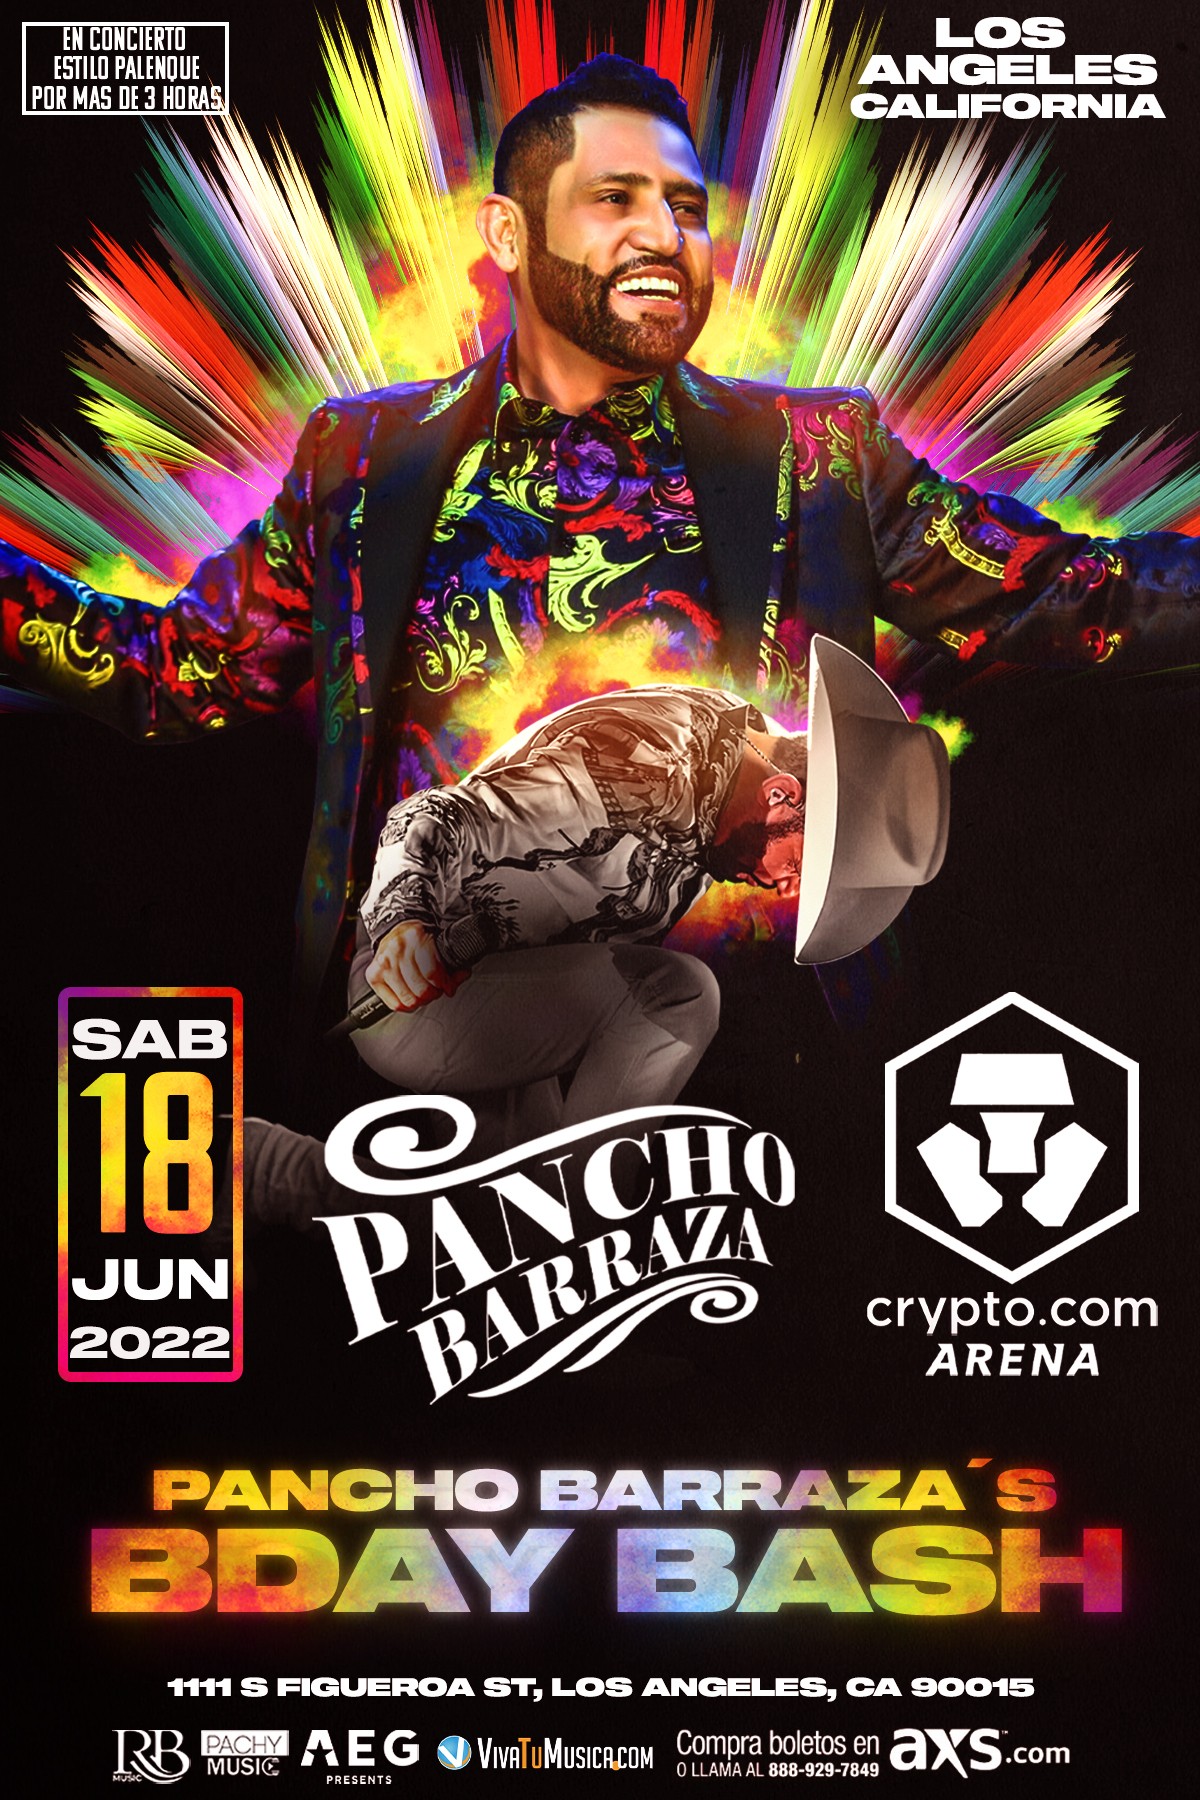 Pancho Barraza Announces Birthday Concert at Arena in L.A